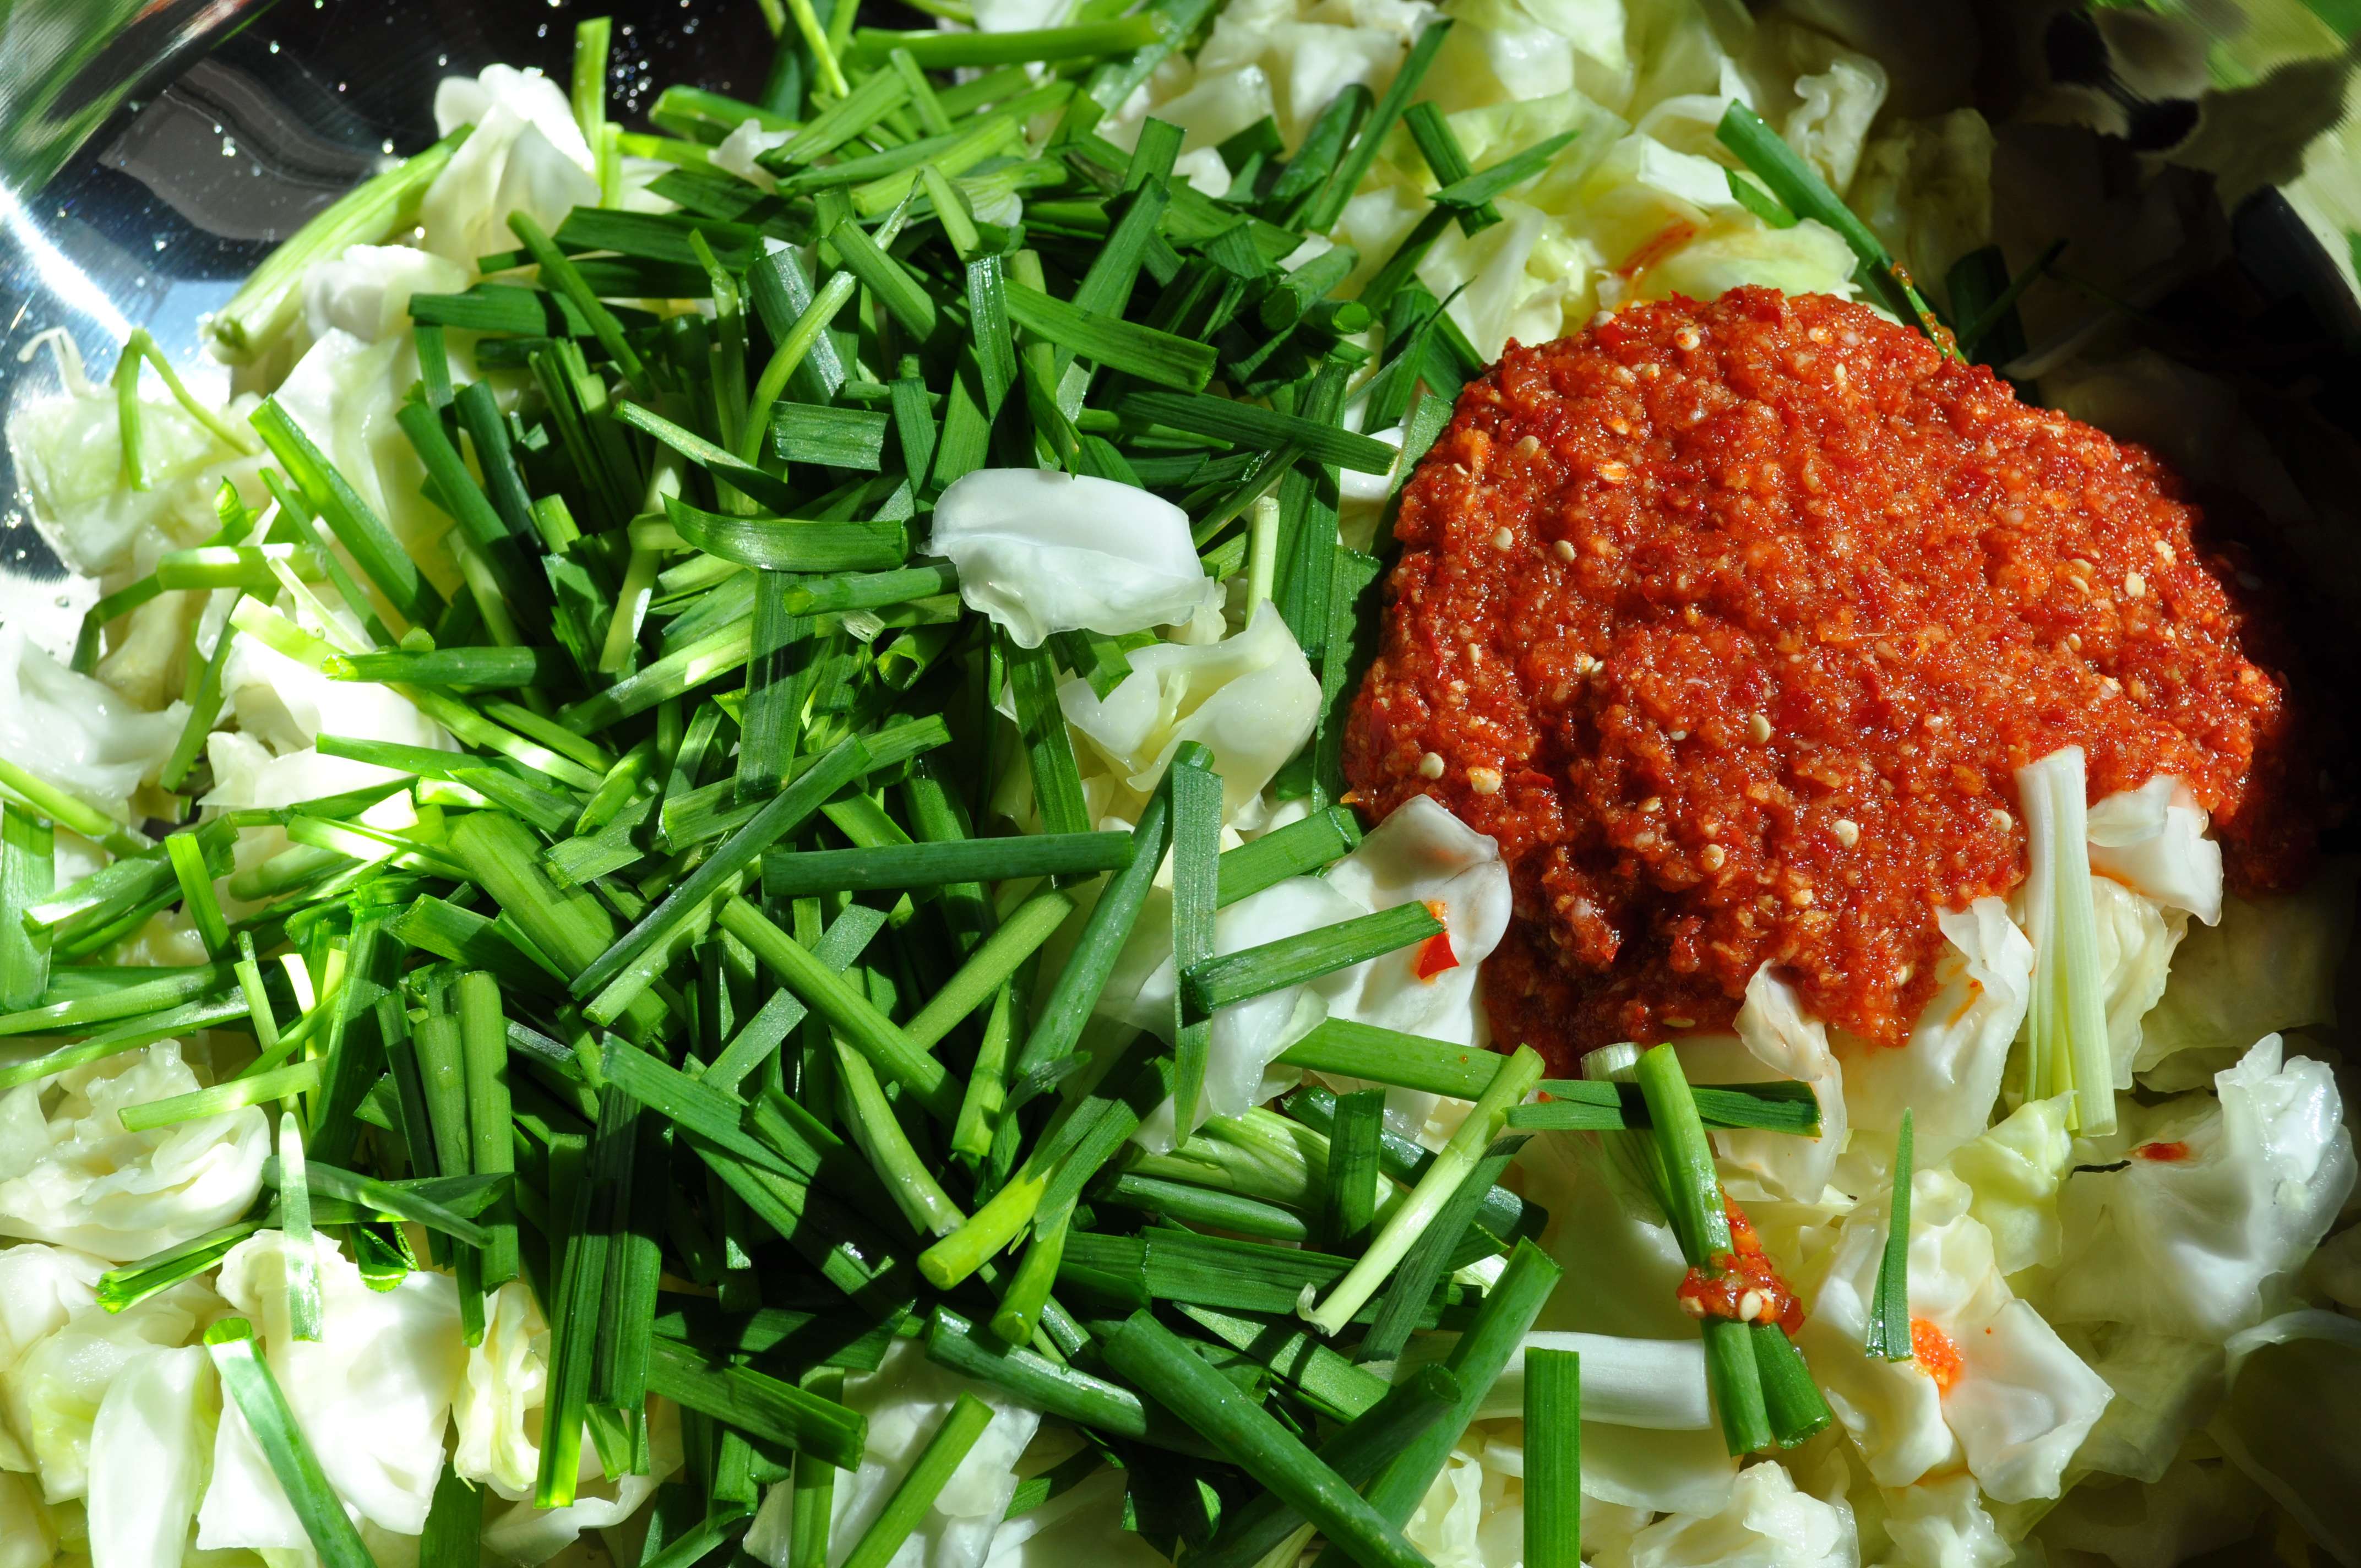 cabbage, chives, green onions and kimchi seasoning in large steel bowl